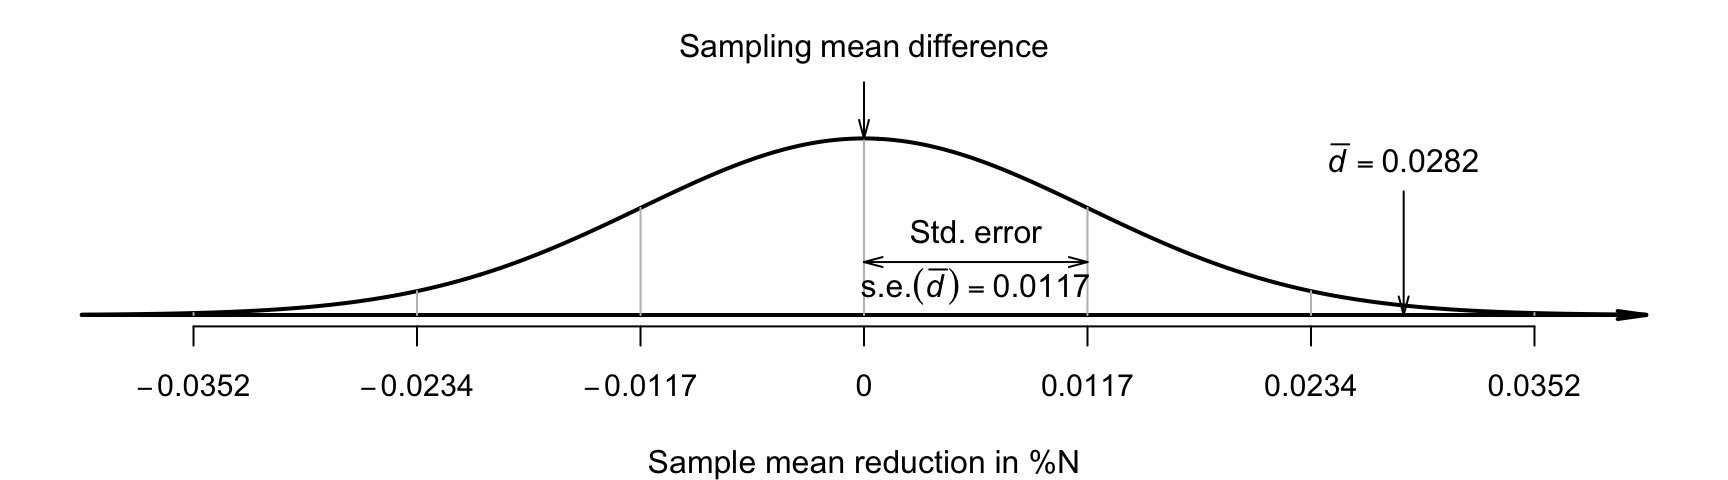 The sampling distribution is a normal distribution; it describes how the sample mean reduction in percentage N varies in samples of size $n = 28$ when the population mean reduction is $0$.